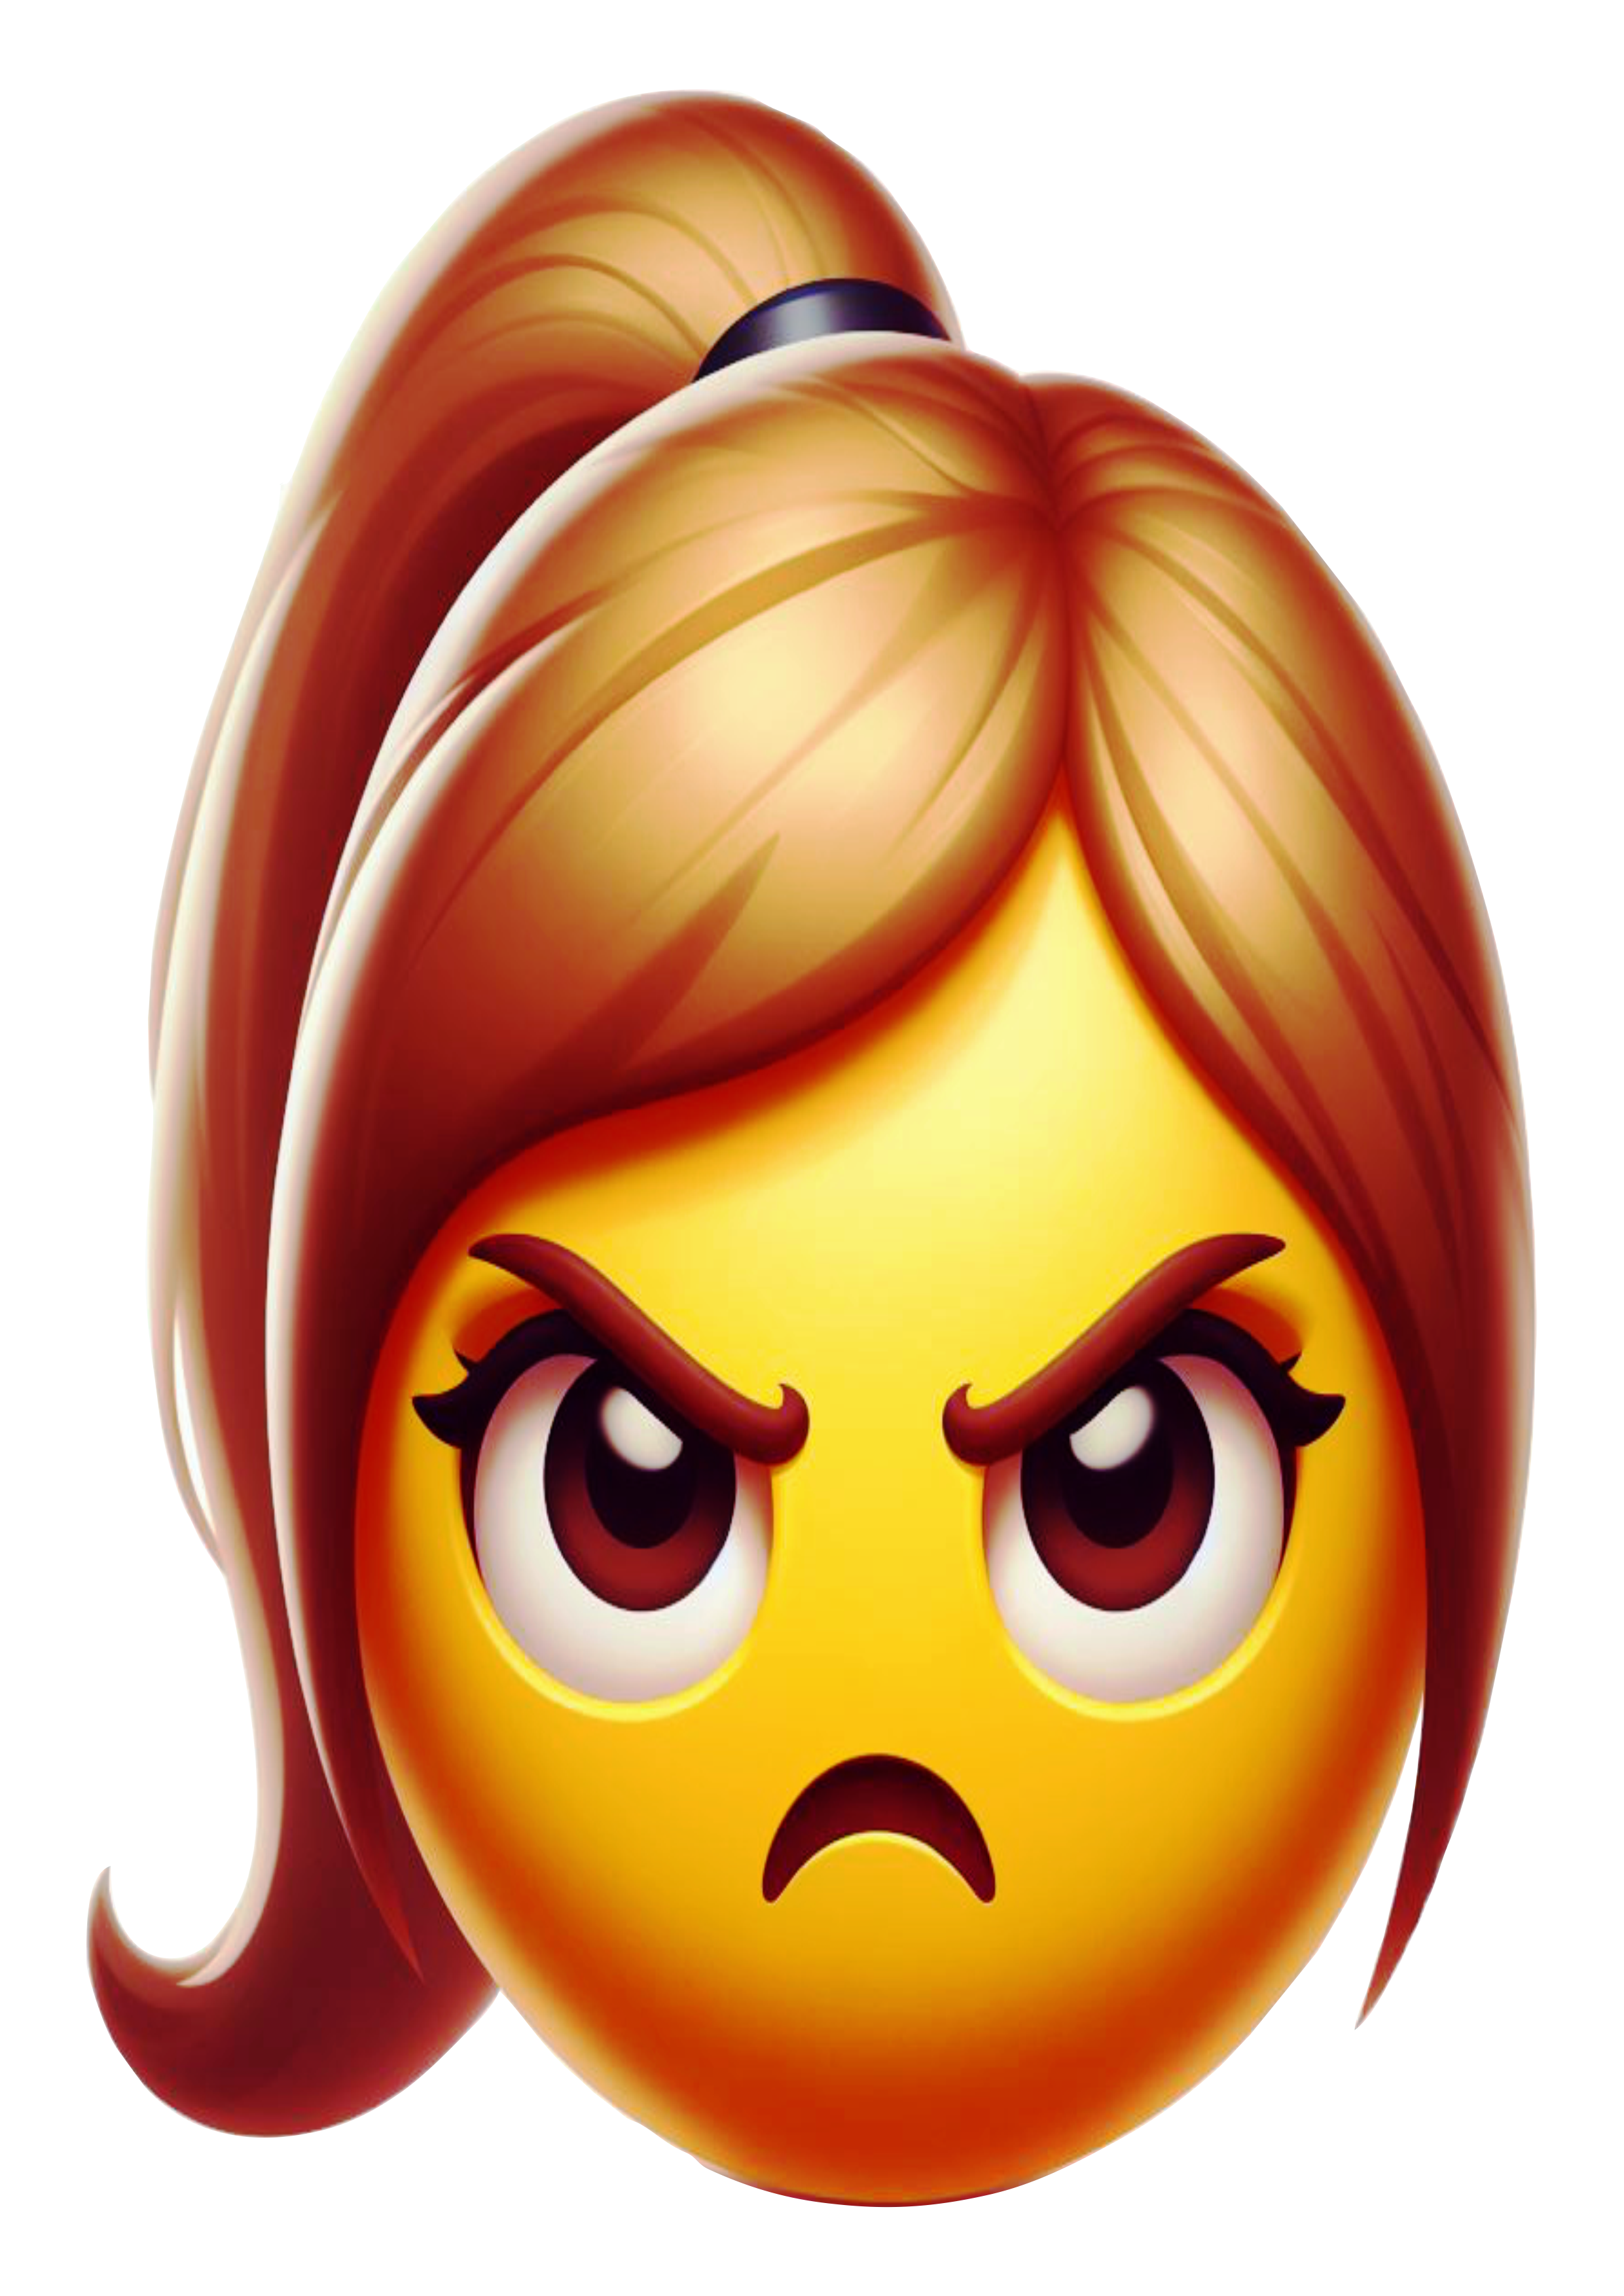 Emoticon Angry Woman Emojis Free PNG